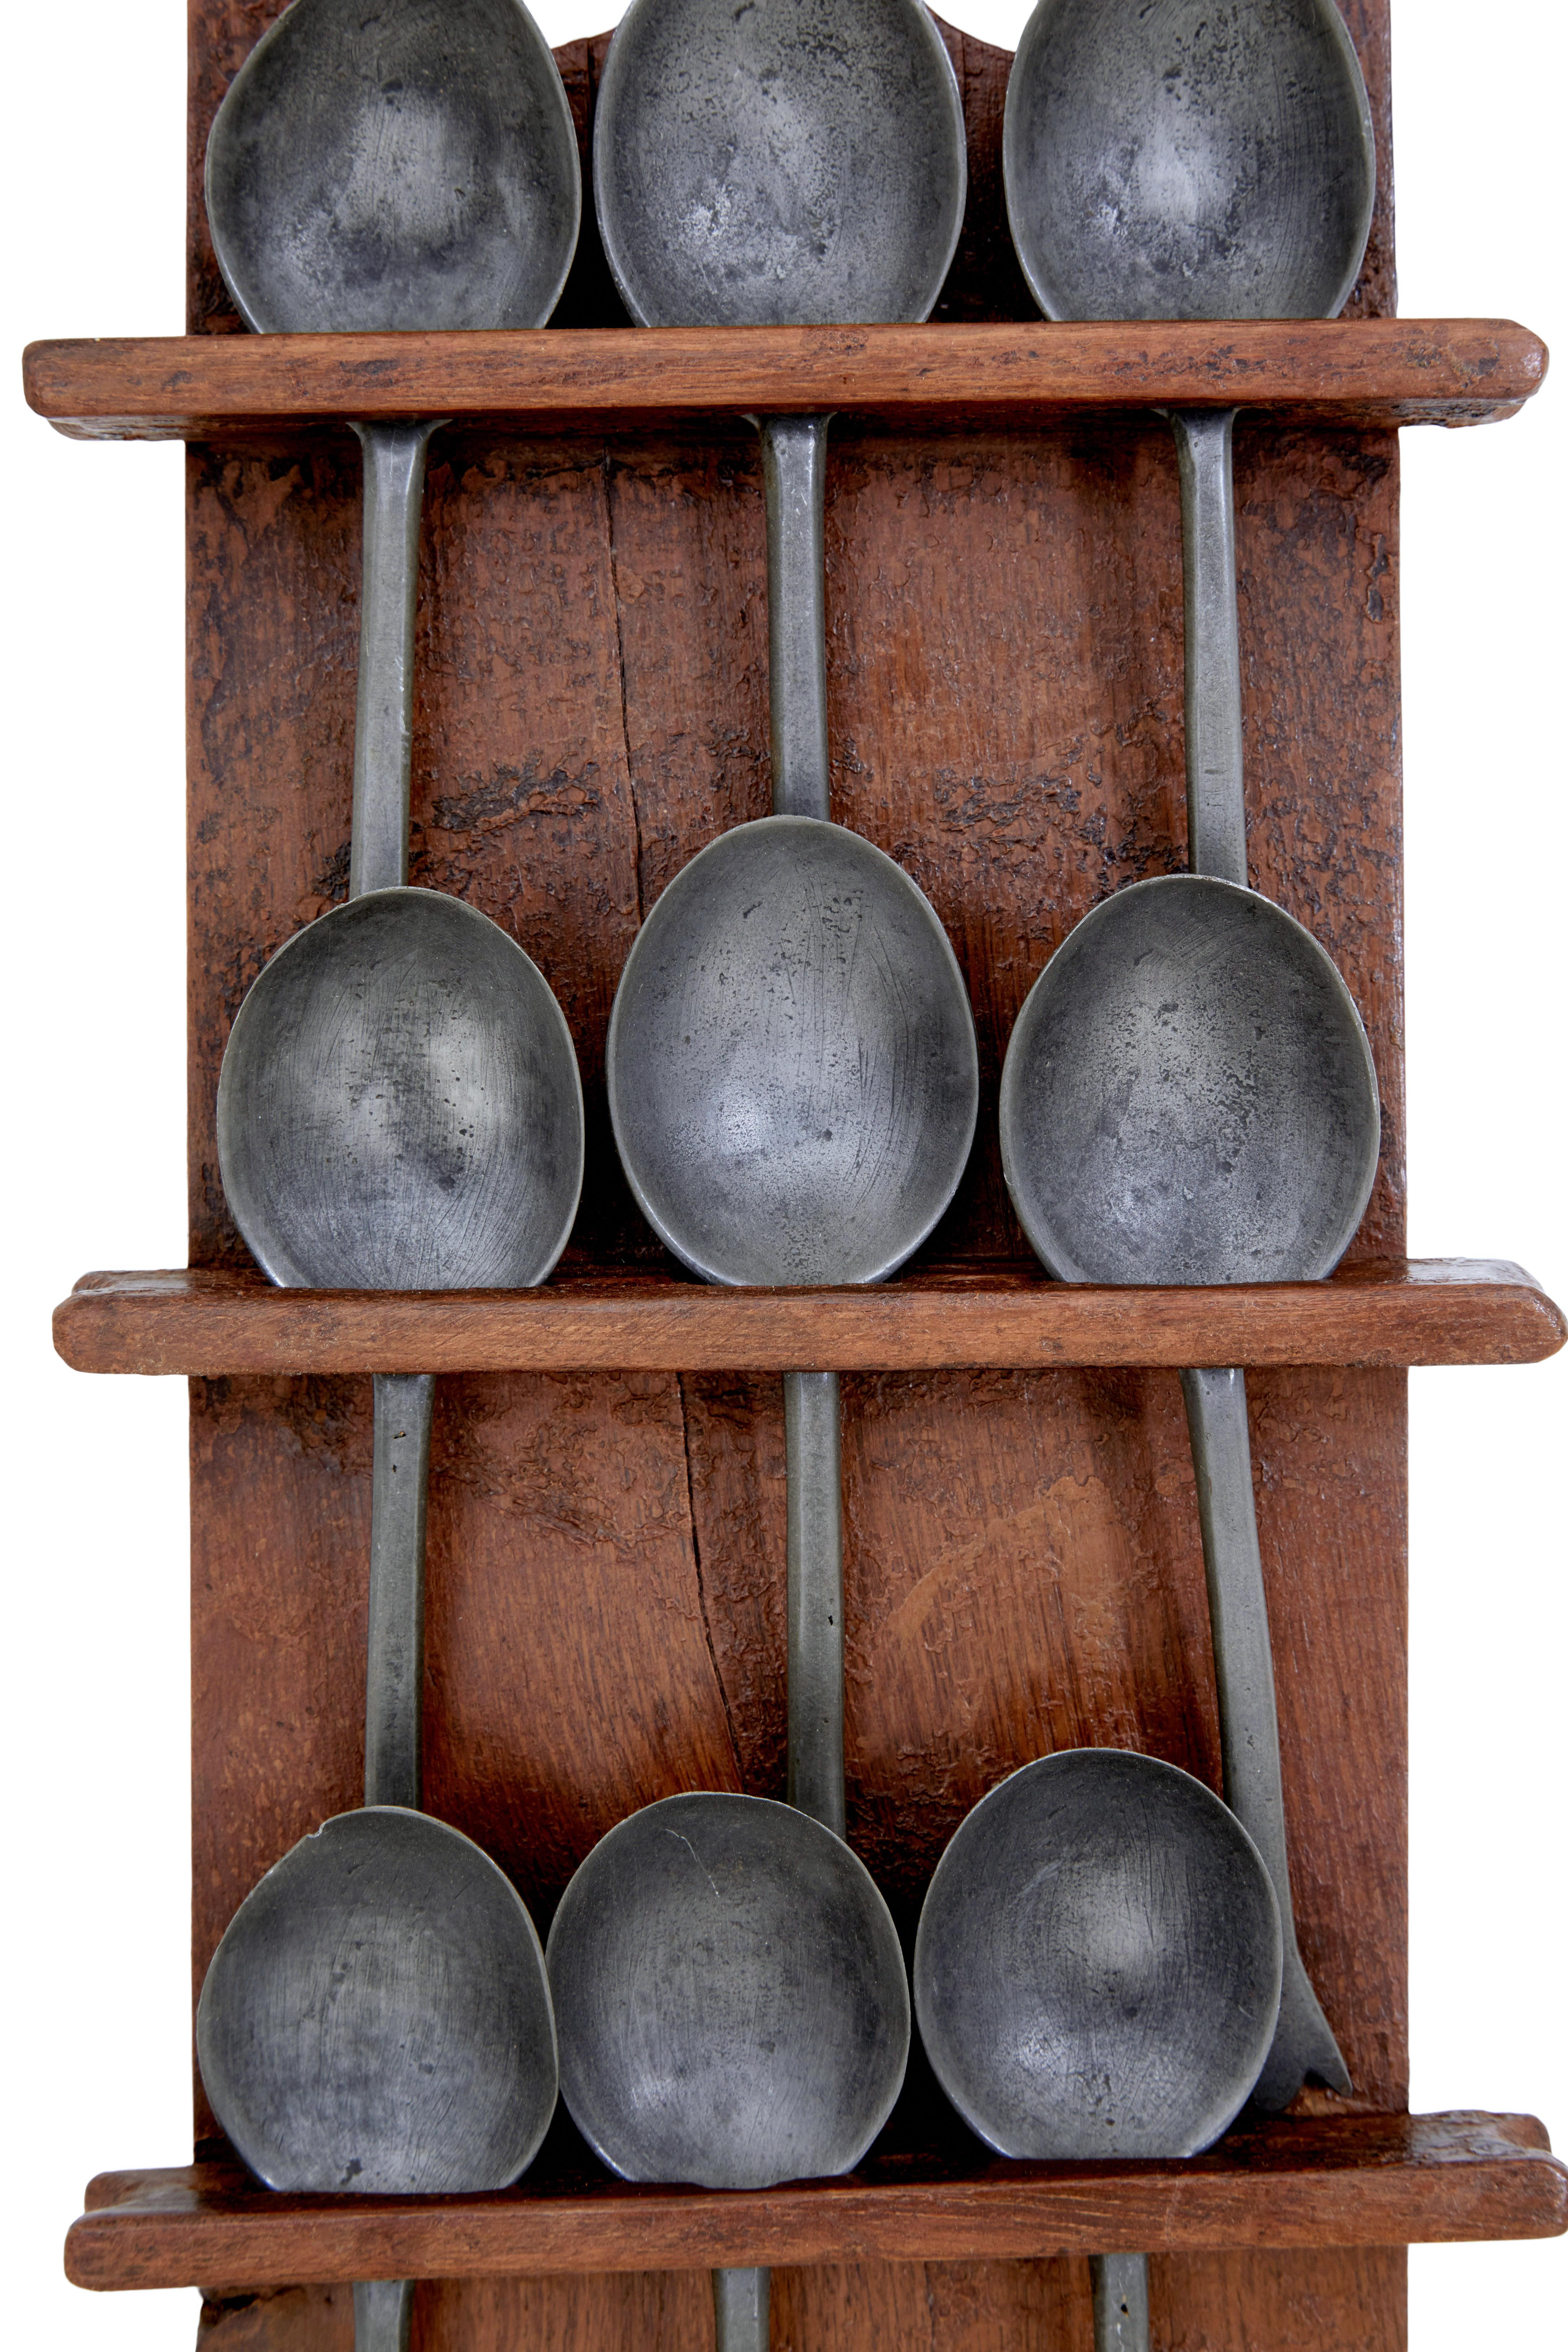 Mid 19th century rustic Swedish hand painted spoon rack circa 1850.

Rustic made spoon rack, hand painted with original paint. Supplied with the original 9 spoons.

Minor losses to paintwork.